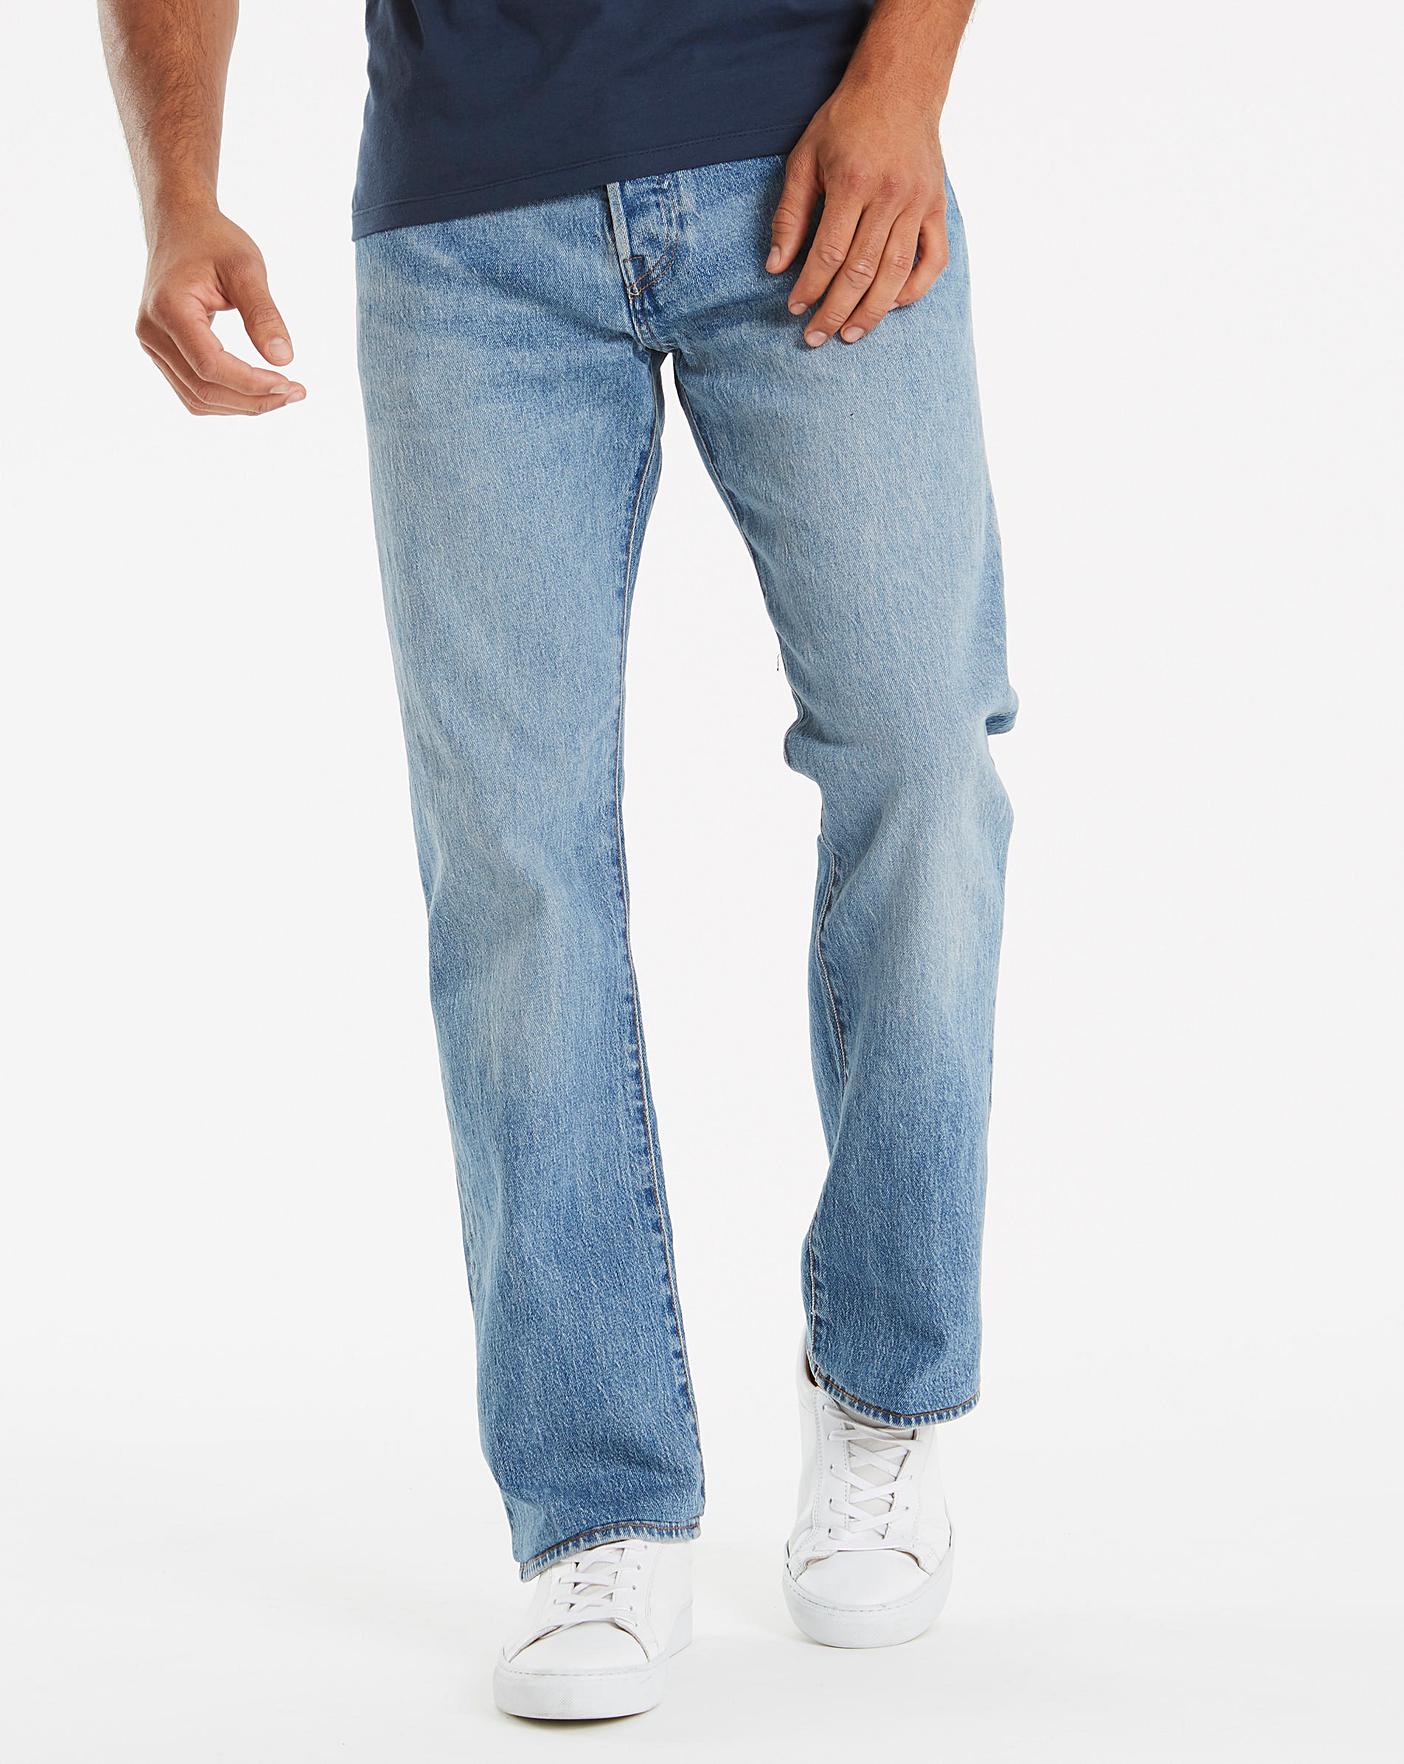 levis 501 baywater off 63% - online-sms.in